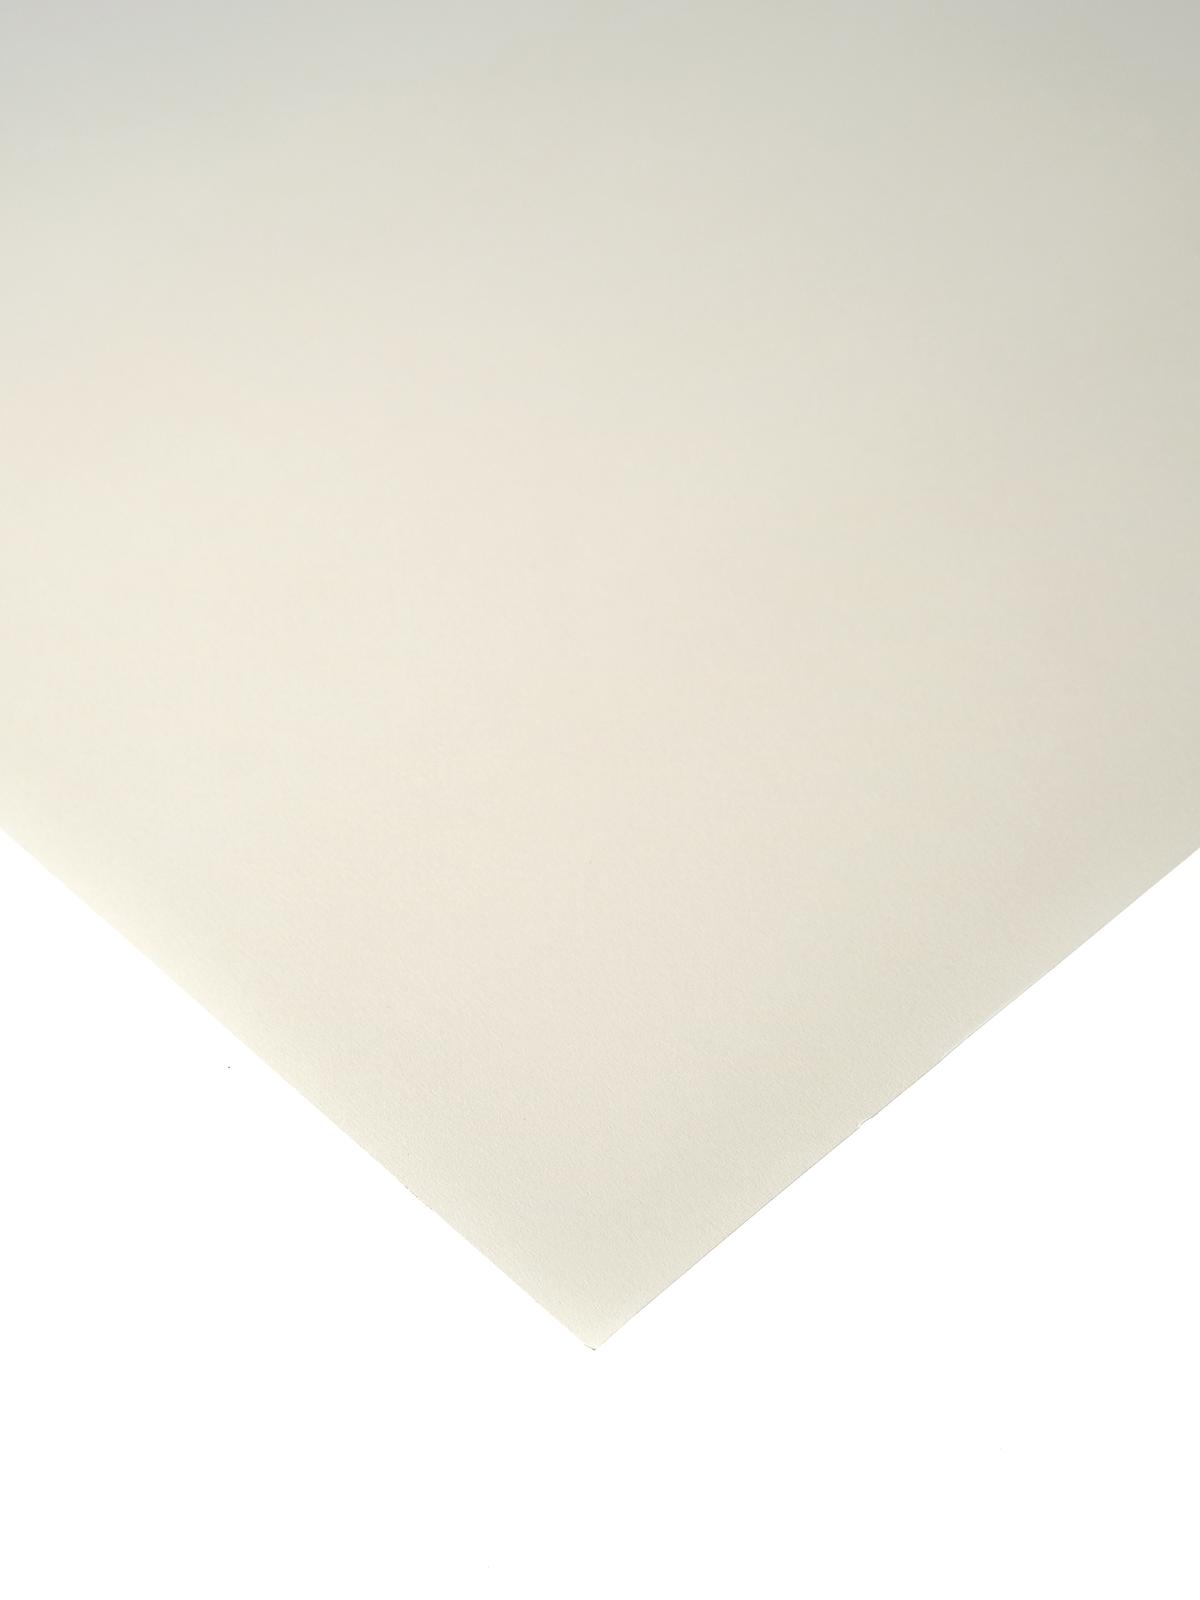 Mi-teintes Tinted Paper Lily 19 In. X 25 In.